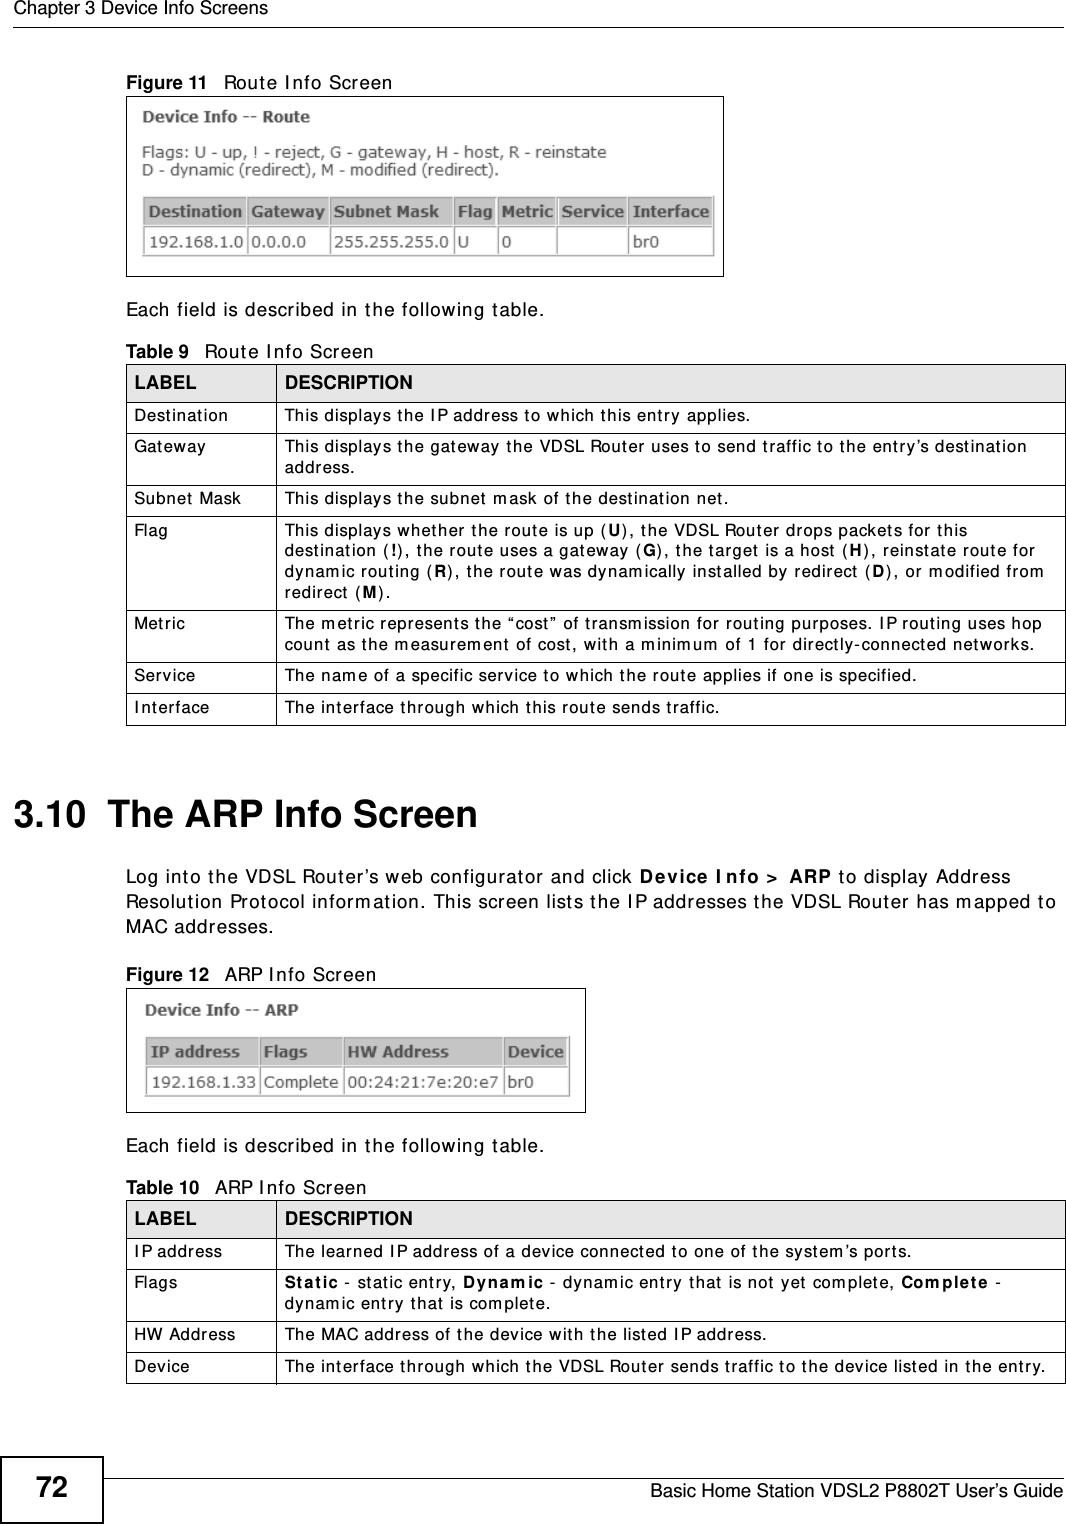 Chapter 3 Device Info ScreensBasic Home Station VDSL2 P8802T User’s Guide72Figure 11   Route I nfo ScreenEach field is described in the following table.3.10  The ARP Info ScreenLog int o the VDSL Router’s web configurat or and click Device  I nfo &gt;  ARP to display Address Resolution Prot ocol inform ation. This screen lists t he I P addresses the VDSL Router has m apped to MAC addresses.Figure 12   ARP I nfo ScreenEach field is described in the following table.Table 9   Rout e I nfo ScreenLABEL DESCRIPTIONDest inat ion This displays the I P address to which this entr y applies.Gat eway  This displays the gat ew ay  t he VDSL Router uses to send t raffic to t he ent ry’s destinat ion addr ess. Subnet  Mask  This displays t he subnet  m ask of the dest inat ion net .Flag  This displays whet her t he rout e is up ( U), t he VDSL Rout er drops packet s for t his dest ination (!) , the rout e uses a gateway  ( G), the target  is a host  ( H), reinst at e route for dynam ic rout ing ( R), t he rout e was dynam ically inst alled by redirect ( D), or m odified from  redirect  ( M) .Met ric  The m et r ic represent s the “ cost ”  of t ransm ission for rout ing purposes. I P rout ing uses hop count  as t he m easurem ent  of cost , w it h a m inim um  of 1 for  directly- connect ed networks.Service  The nam e of a specific serv ice t o which the rout e applies if one is specified.I nter face The int erface t hrough which this rout e sends t raffic.Table 10   ARP I nfo ScreenLABEL DESCRIPTIONI P addr ess The learned I P address of a device connect ed t o one of t he syst em ’s ports.Flags  St at ic -  st at ic ent ry, Dyna m ic -  dynam ic entry t hat is not  yet  com plet e, Com p let e  -  dynamic entr y t hat  is com plet e.HW Addr ess  The MAC address of the device wit h t he listed I P address.Device  The interface through which the VDSL Router sends traffic to t he device listed in the entry.